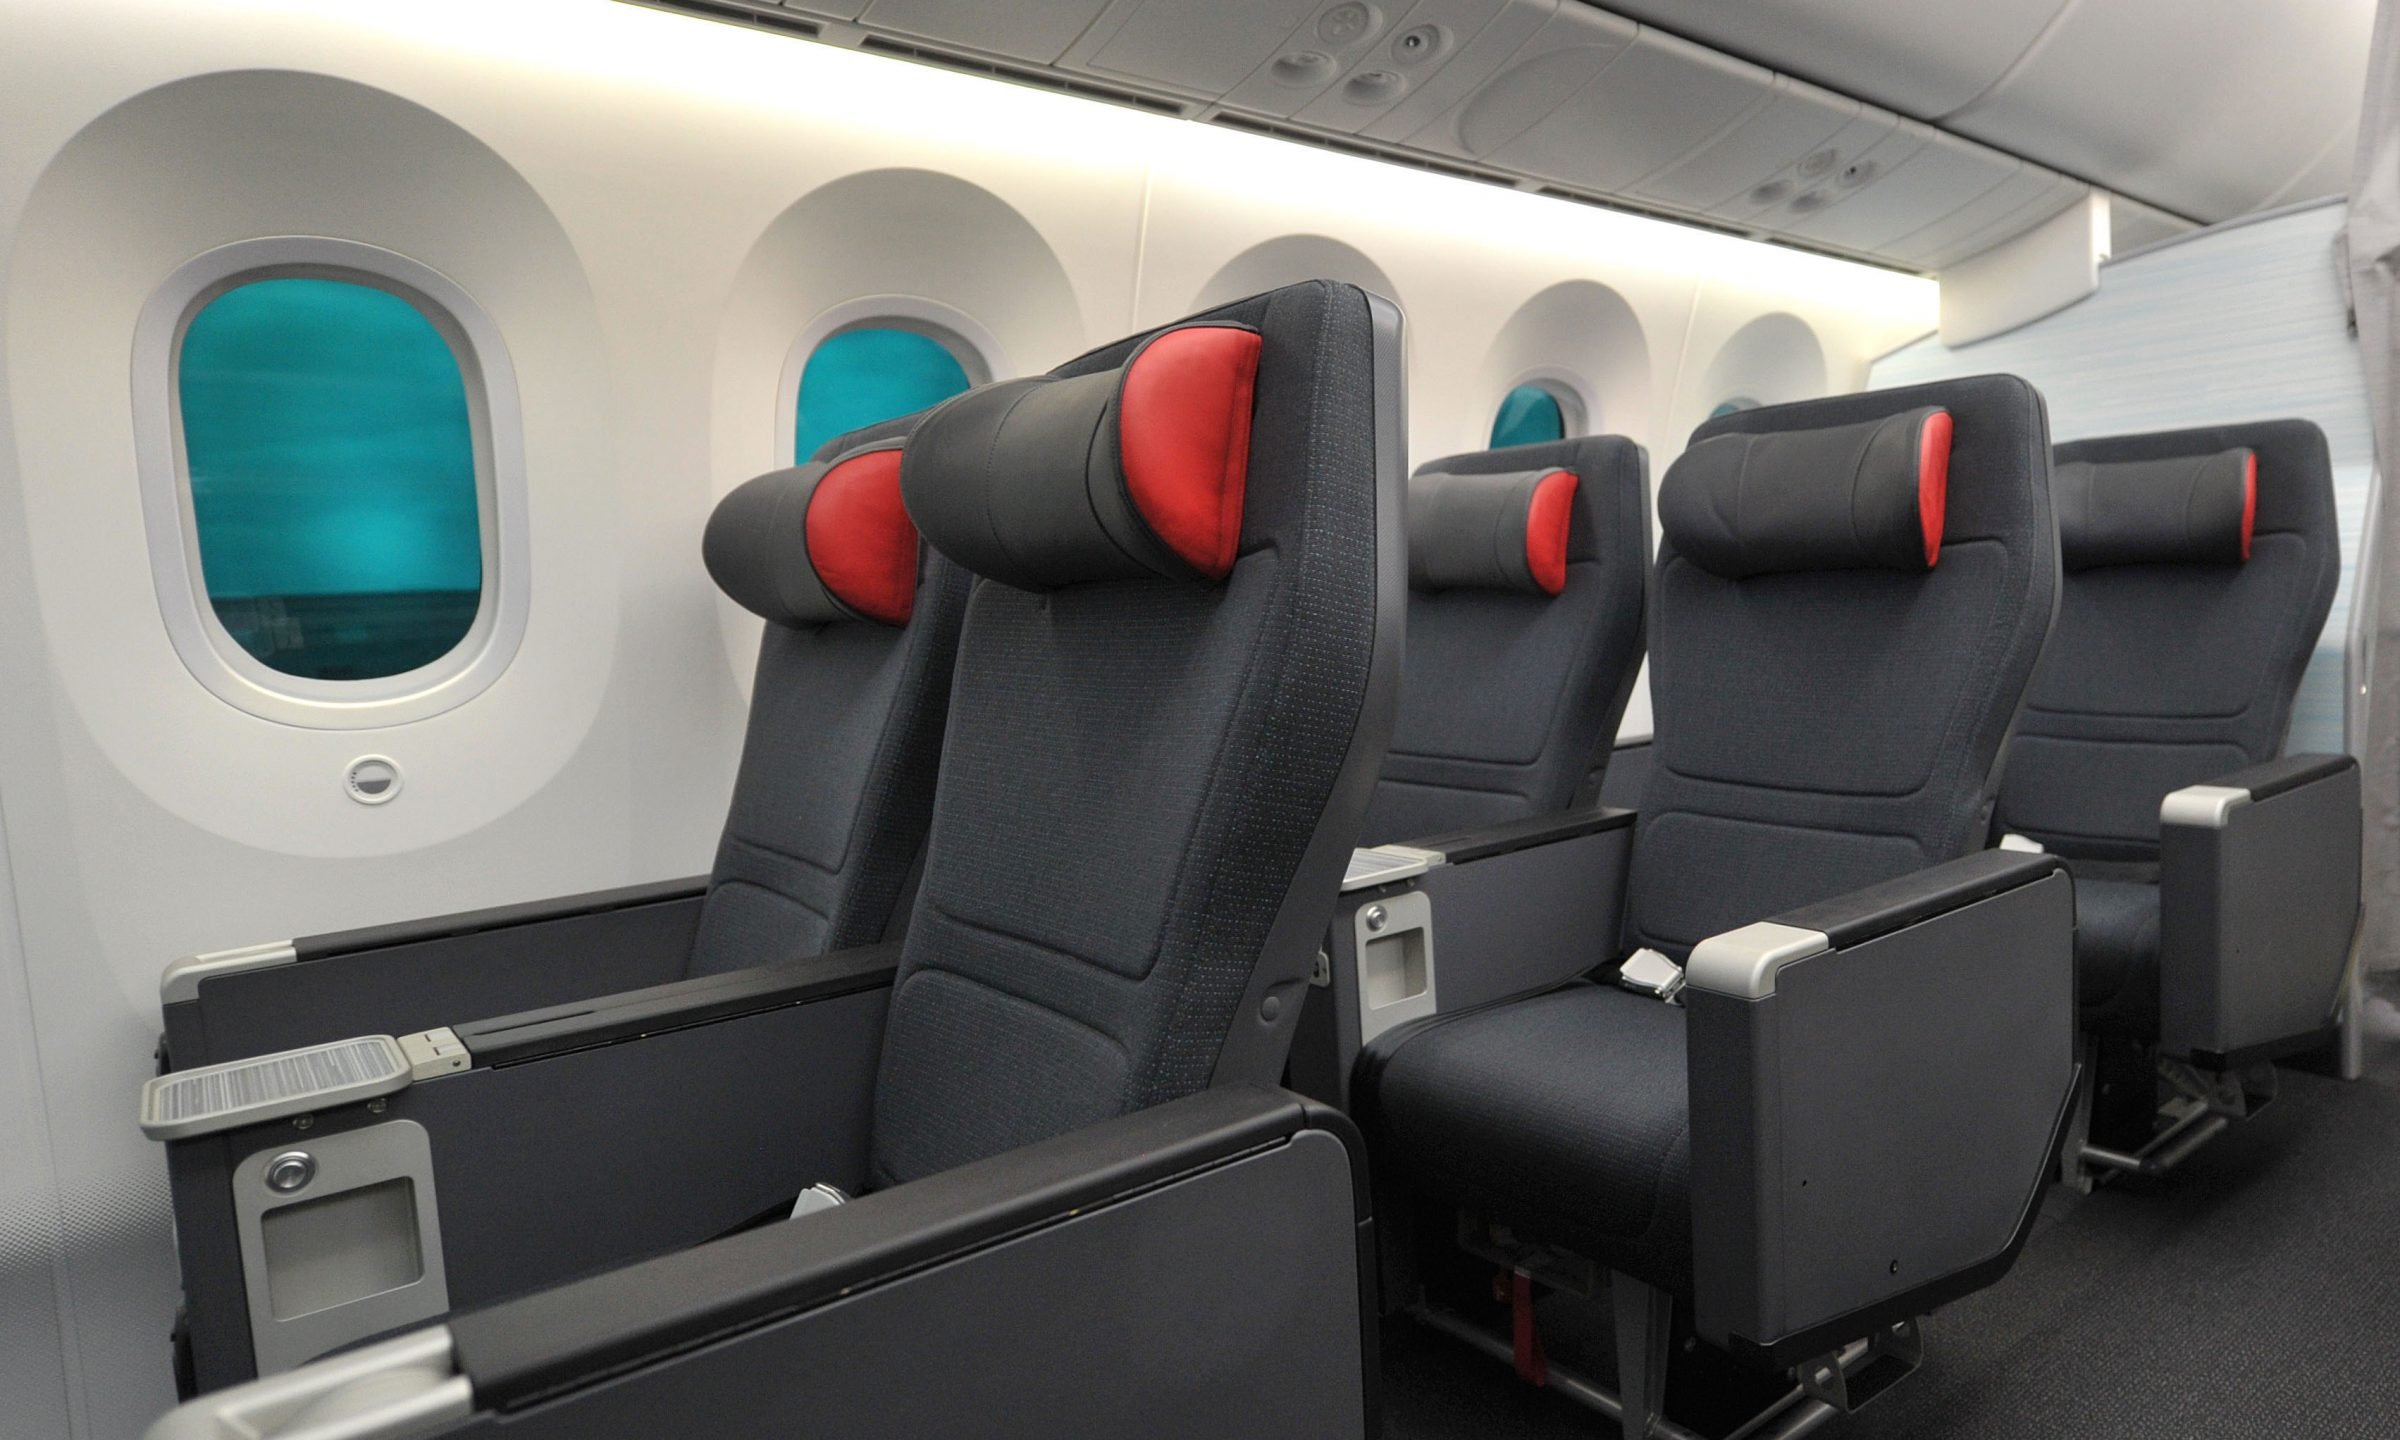 21 ways to make your economy class seat more comfortable while flying